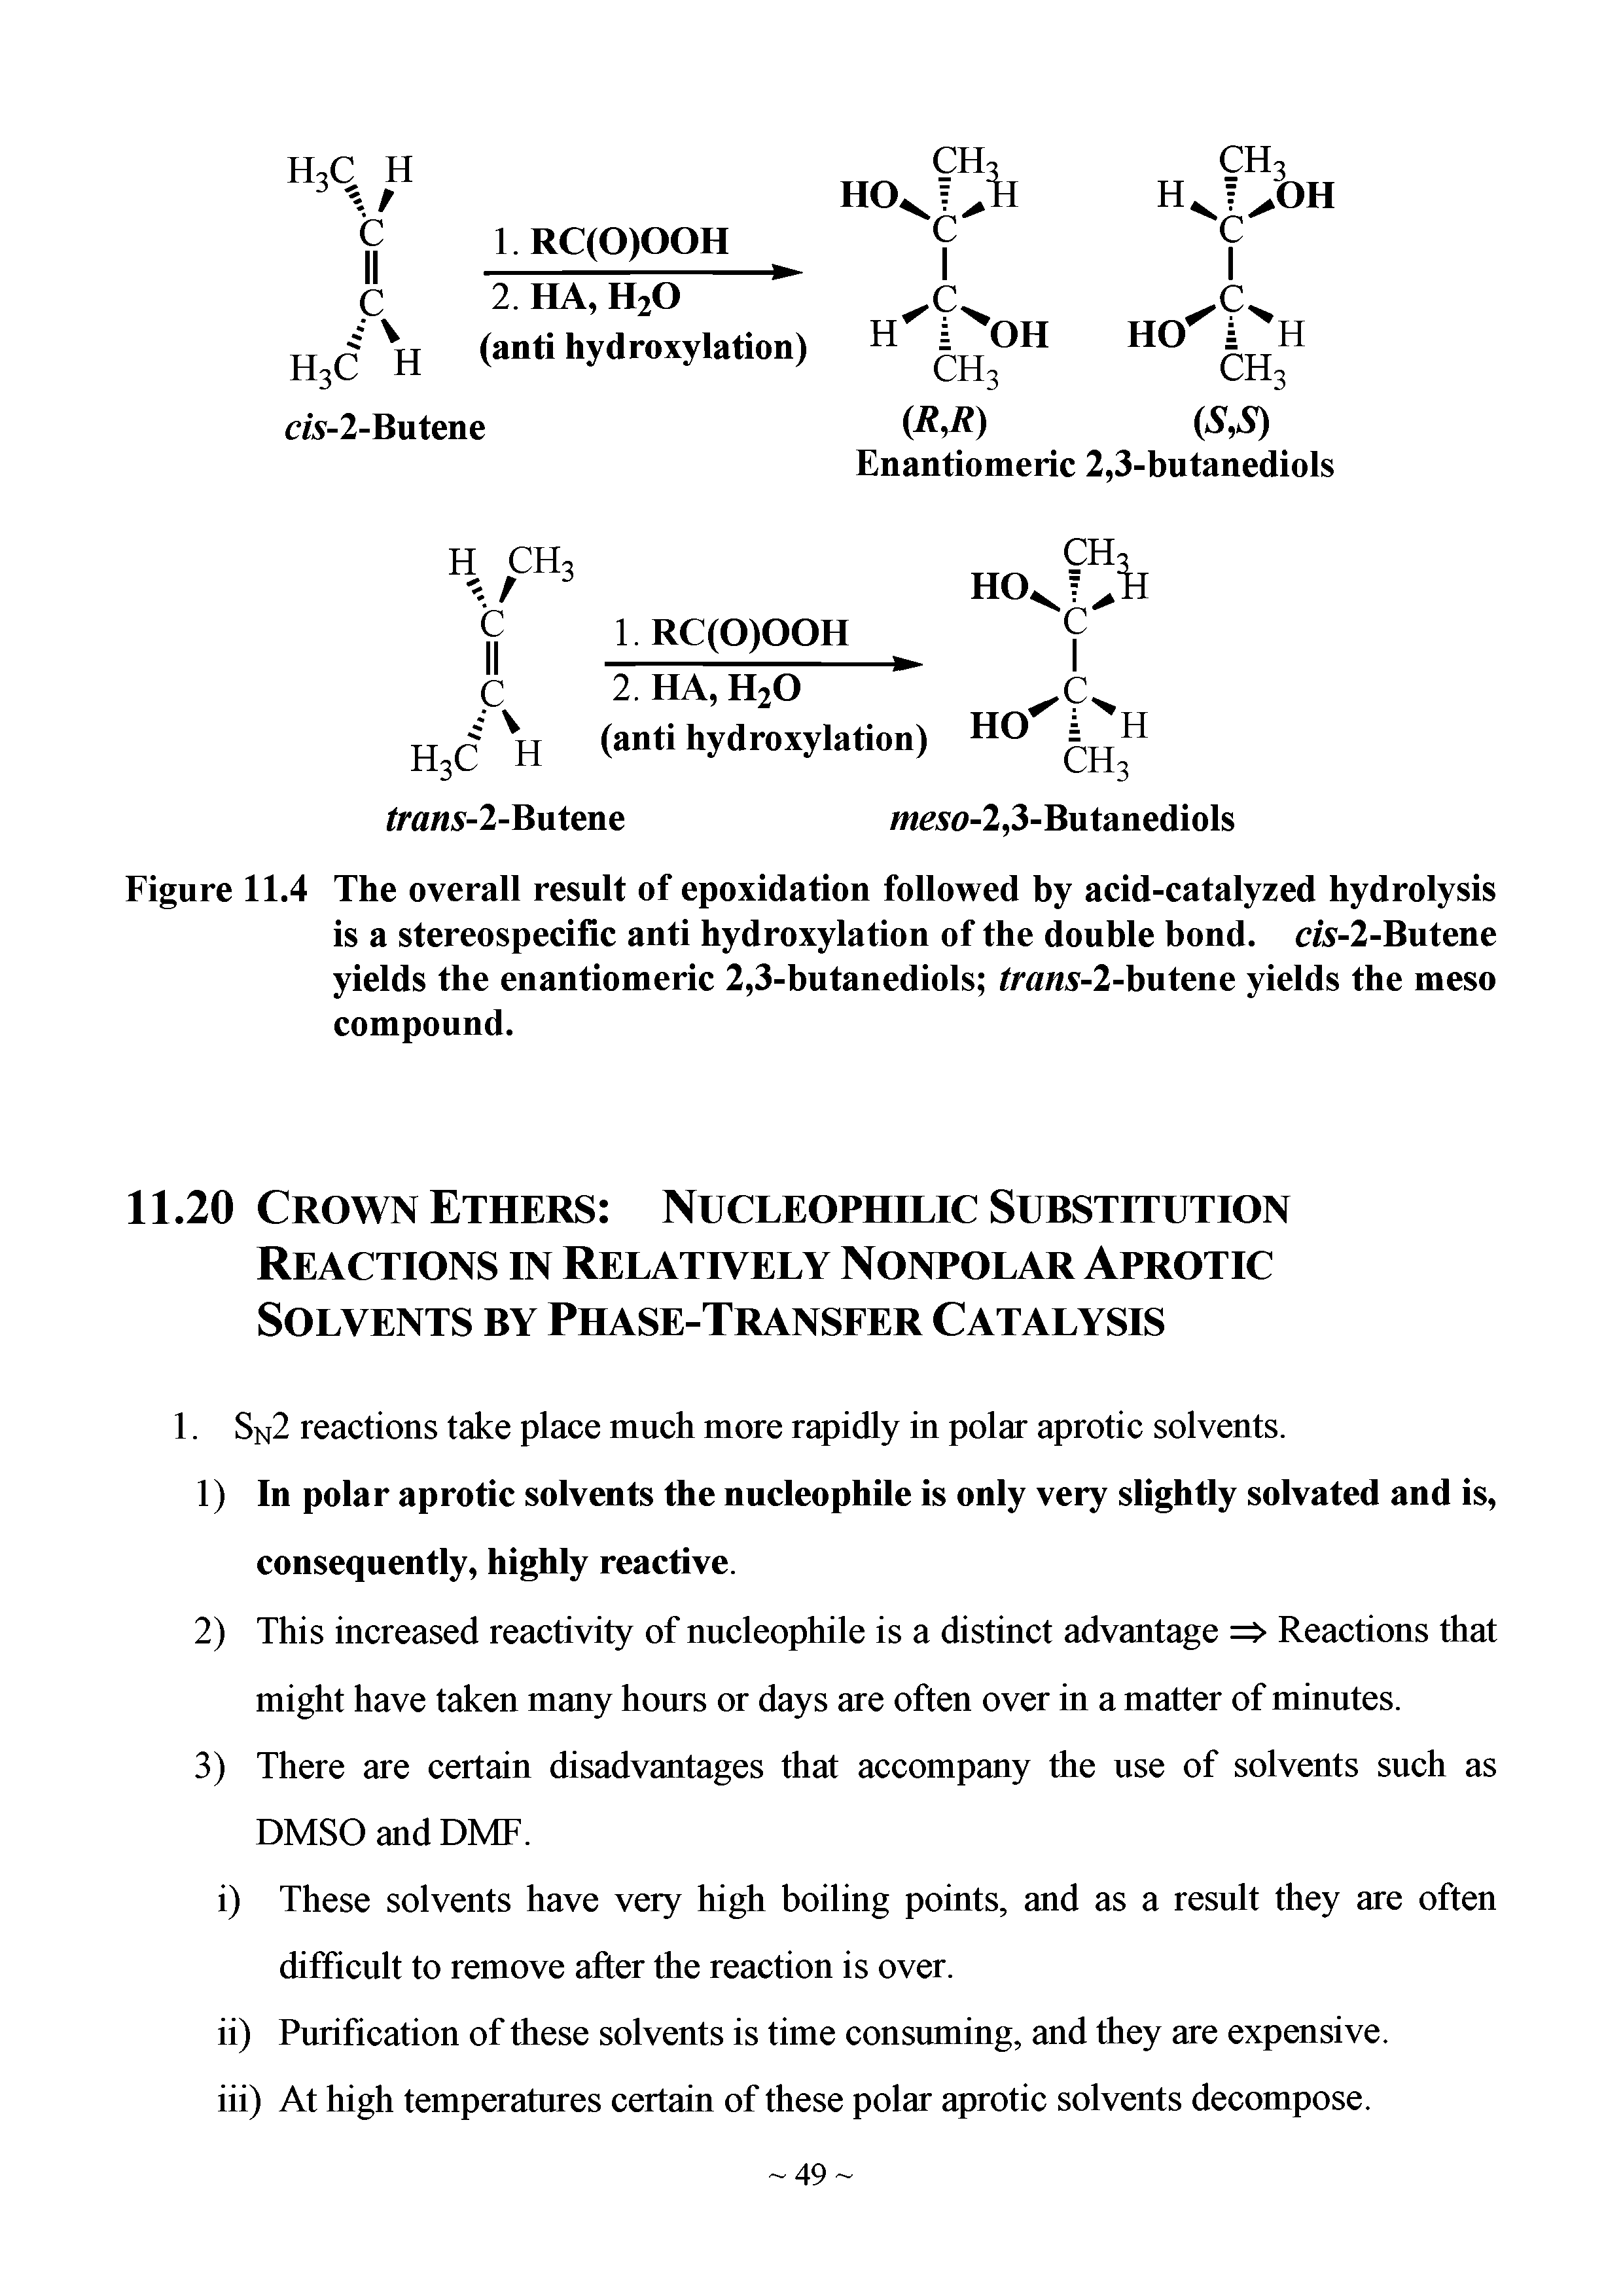 Figure 11.4 The overall result of epoxidation followed by acid-catalyzed hydrolysis is a stereospecific anti hydroxylation of the double bond. ds-2-Butene yields the enantiomeric 2,3-butanediols tra x-2-butene yields the meso compound.